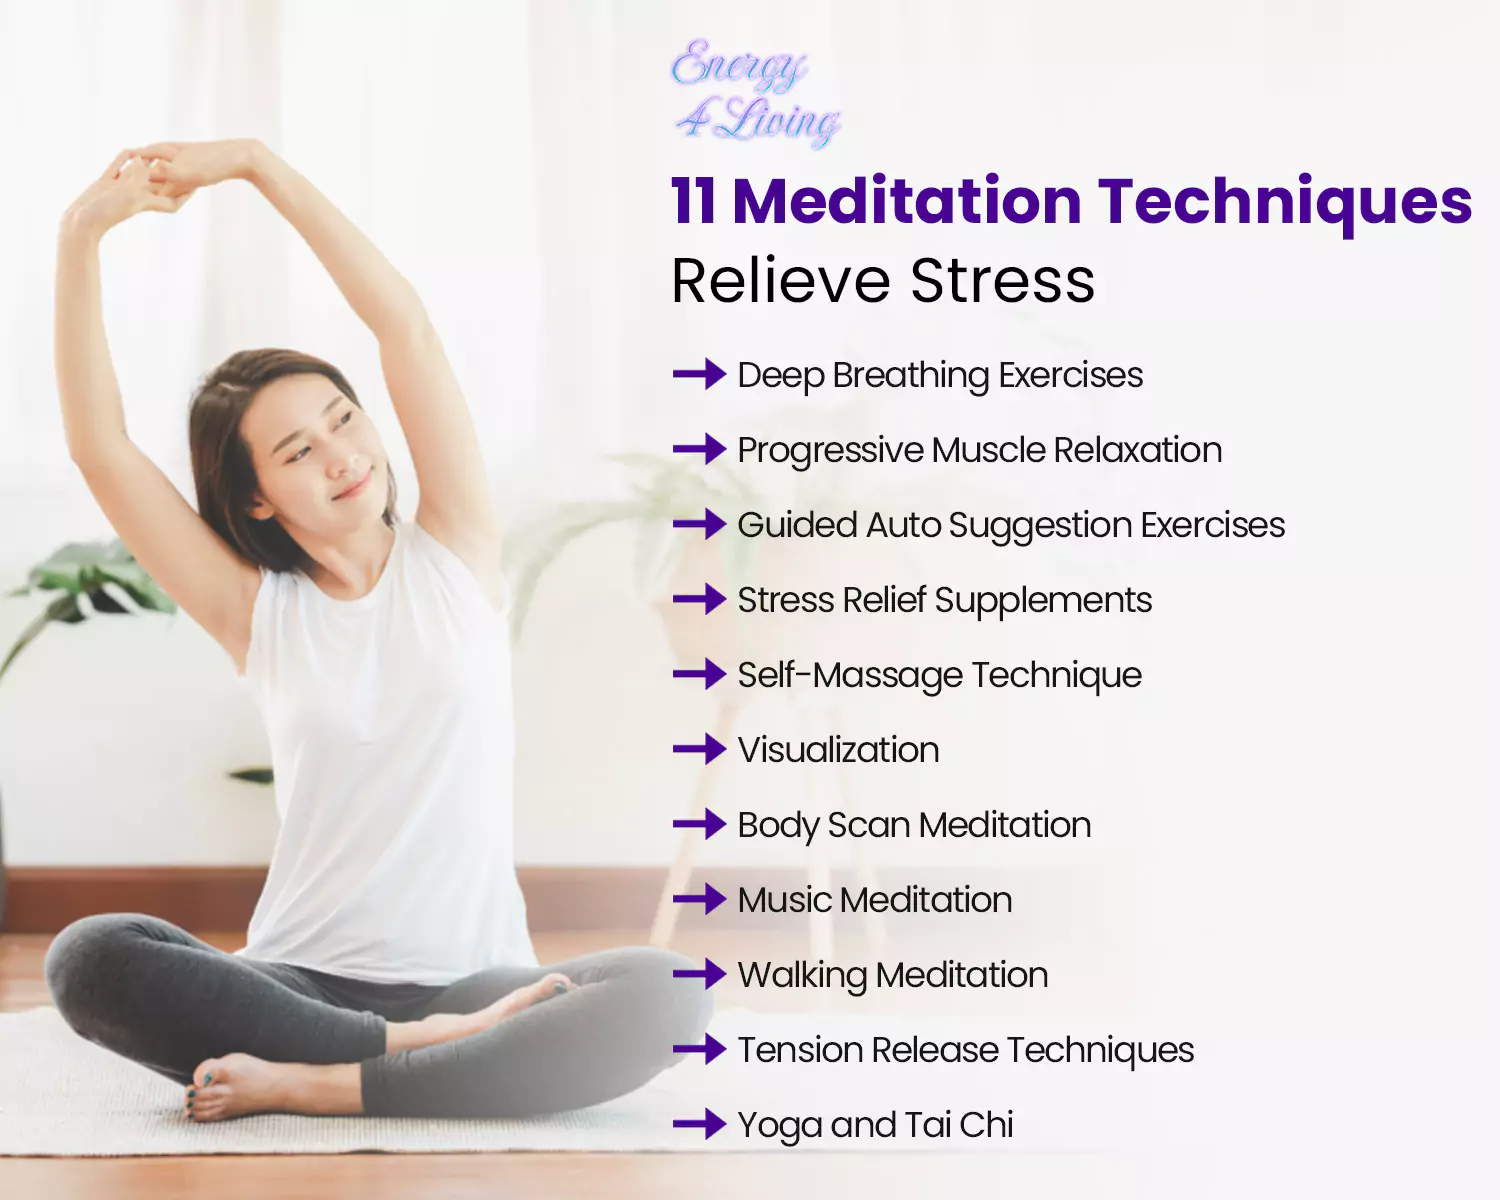 11 Meditation Techniques to Relieve Stress
